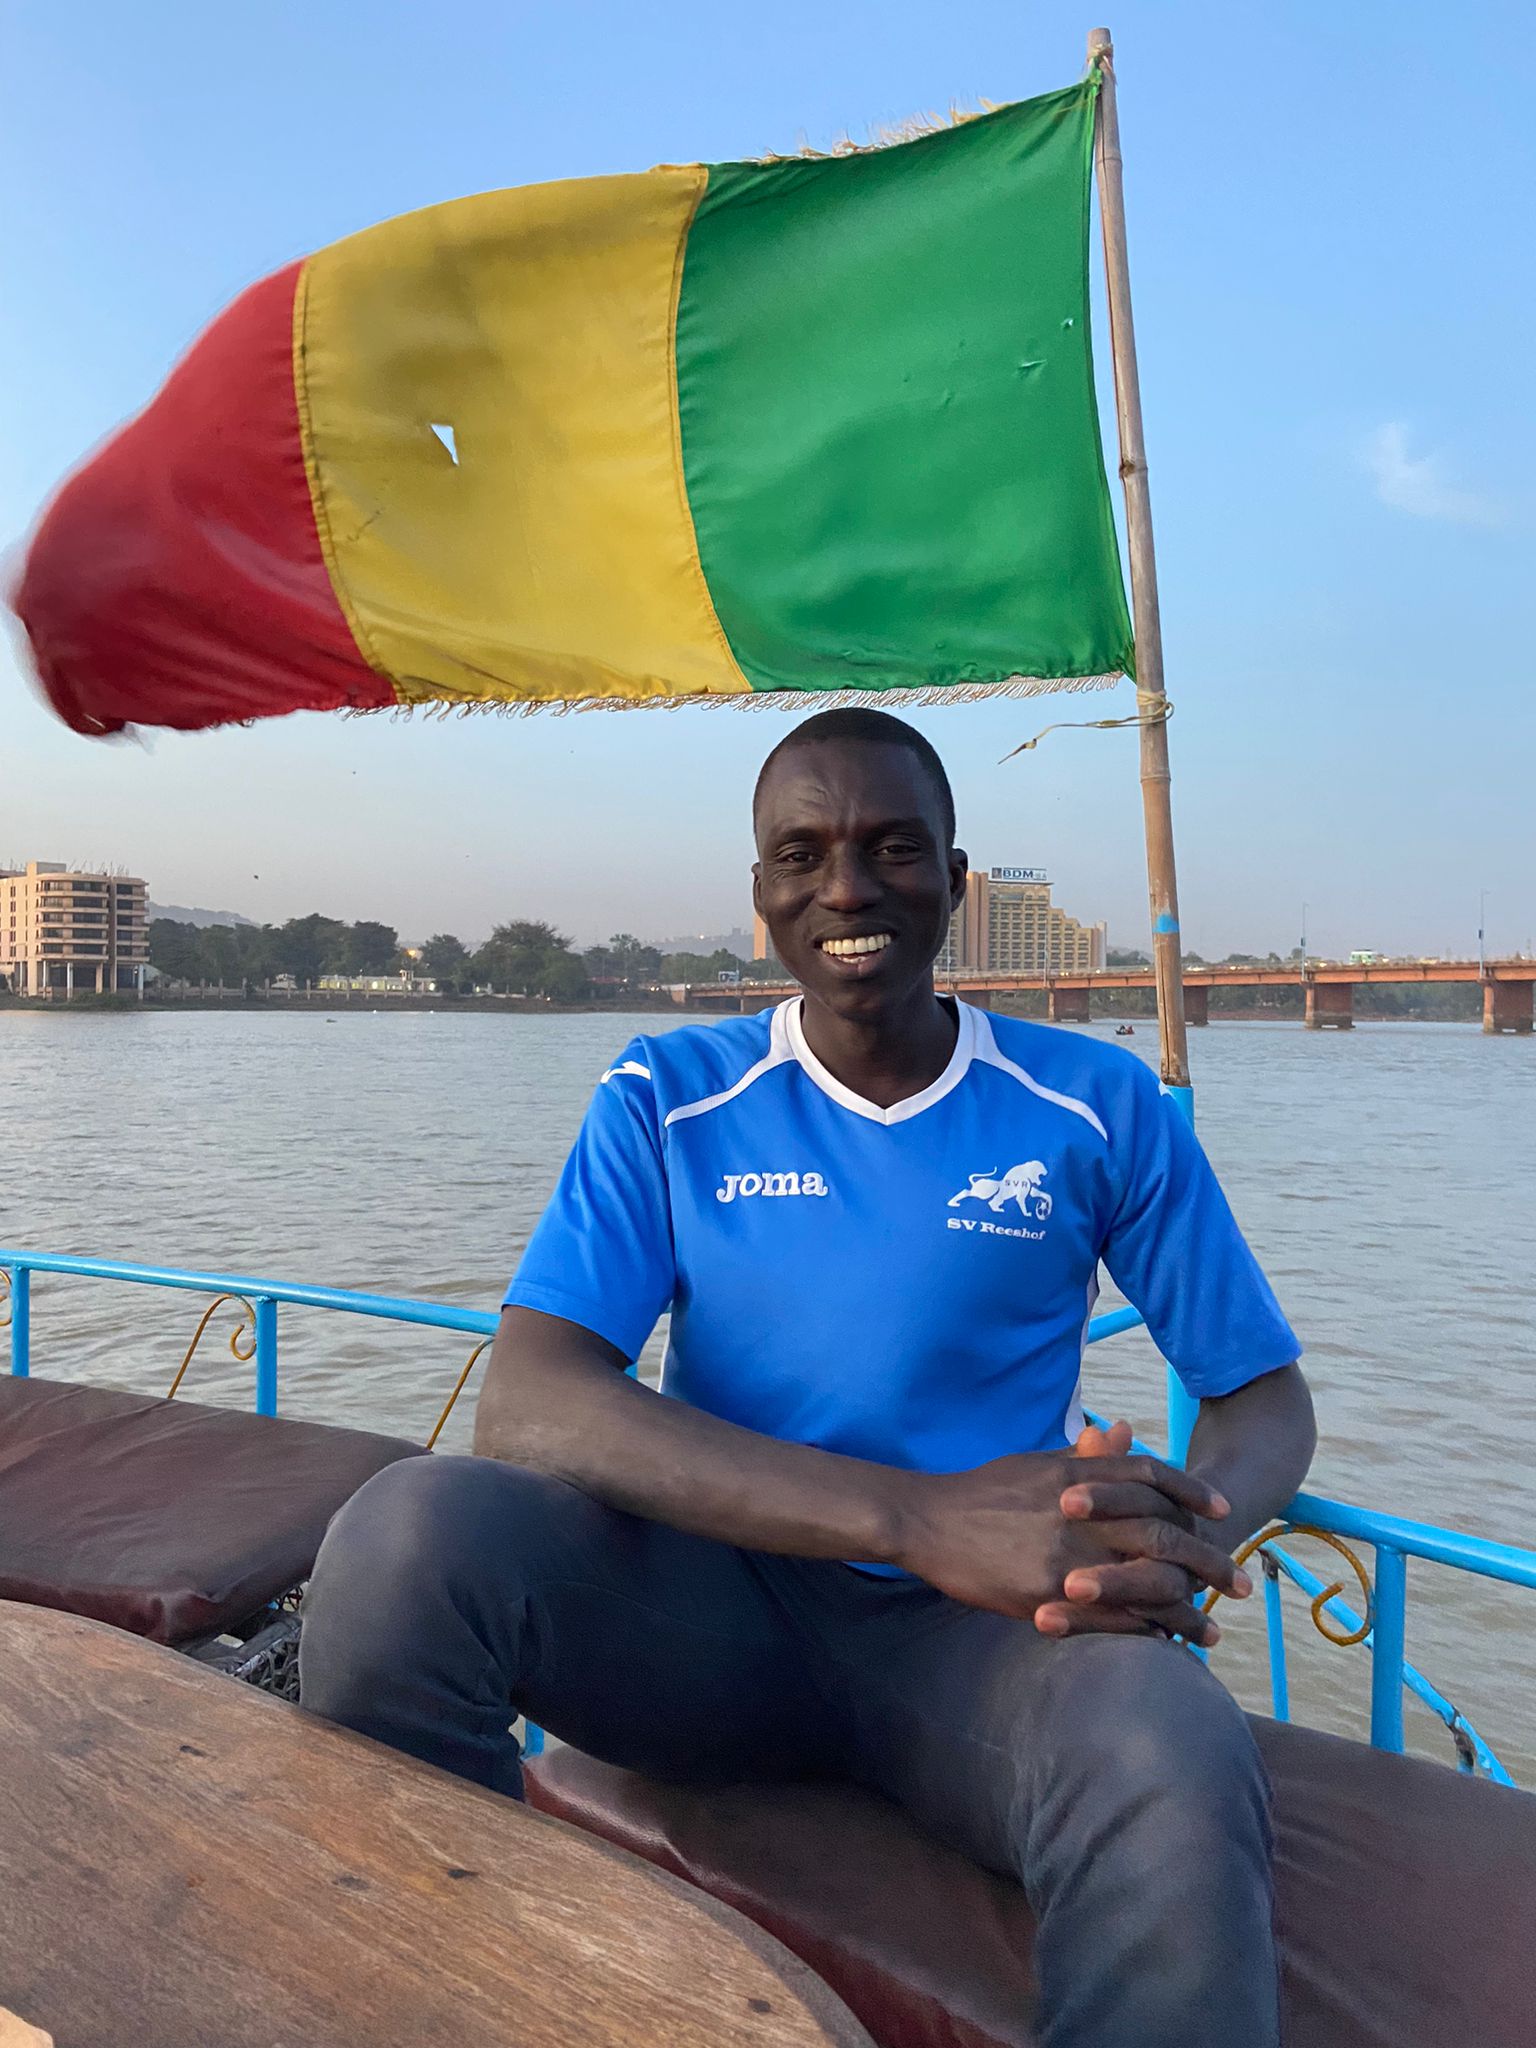 Boubacar Sy of the Envisioneurs Talent Studio on the Niger River in Bamako, Mali